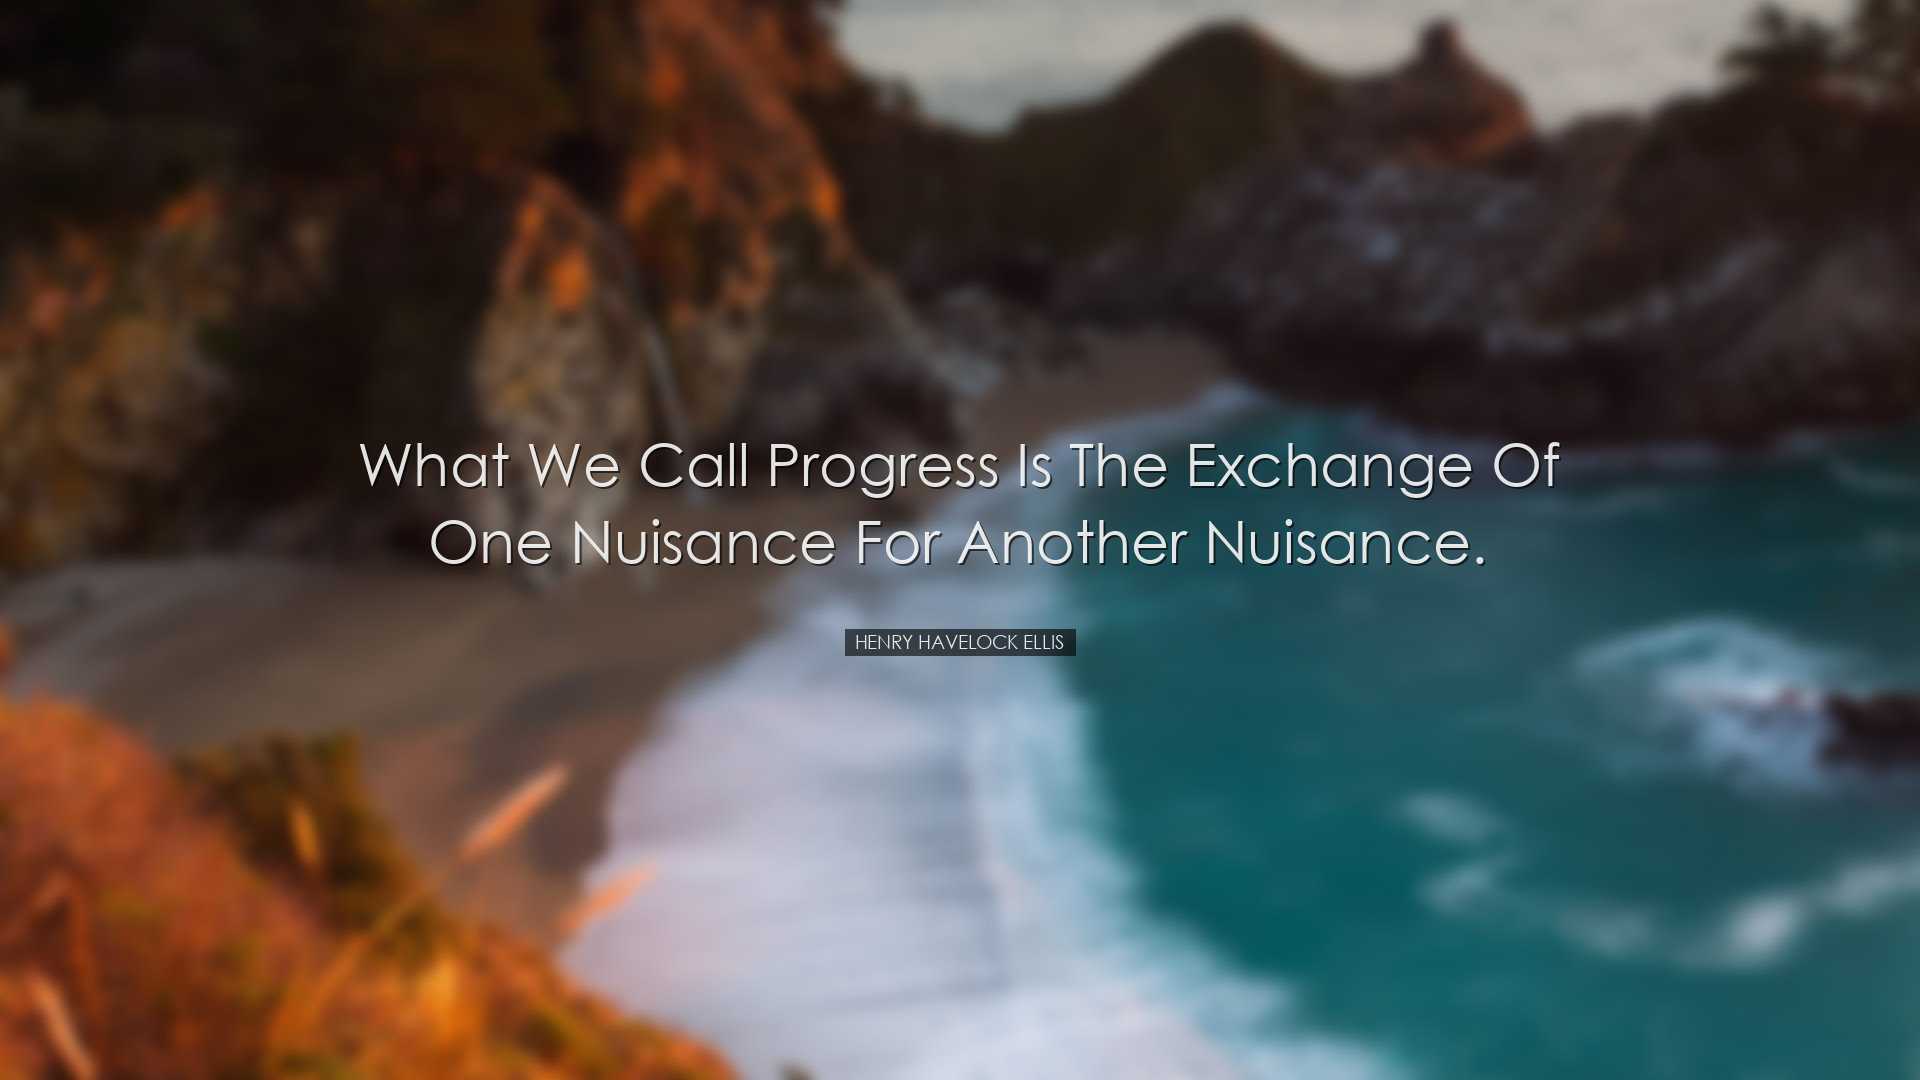 What we call progress is the exchange of one nuisance for another